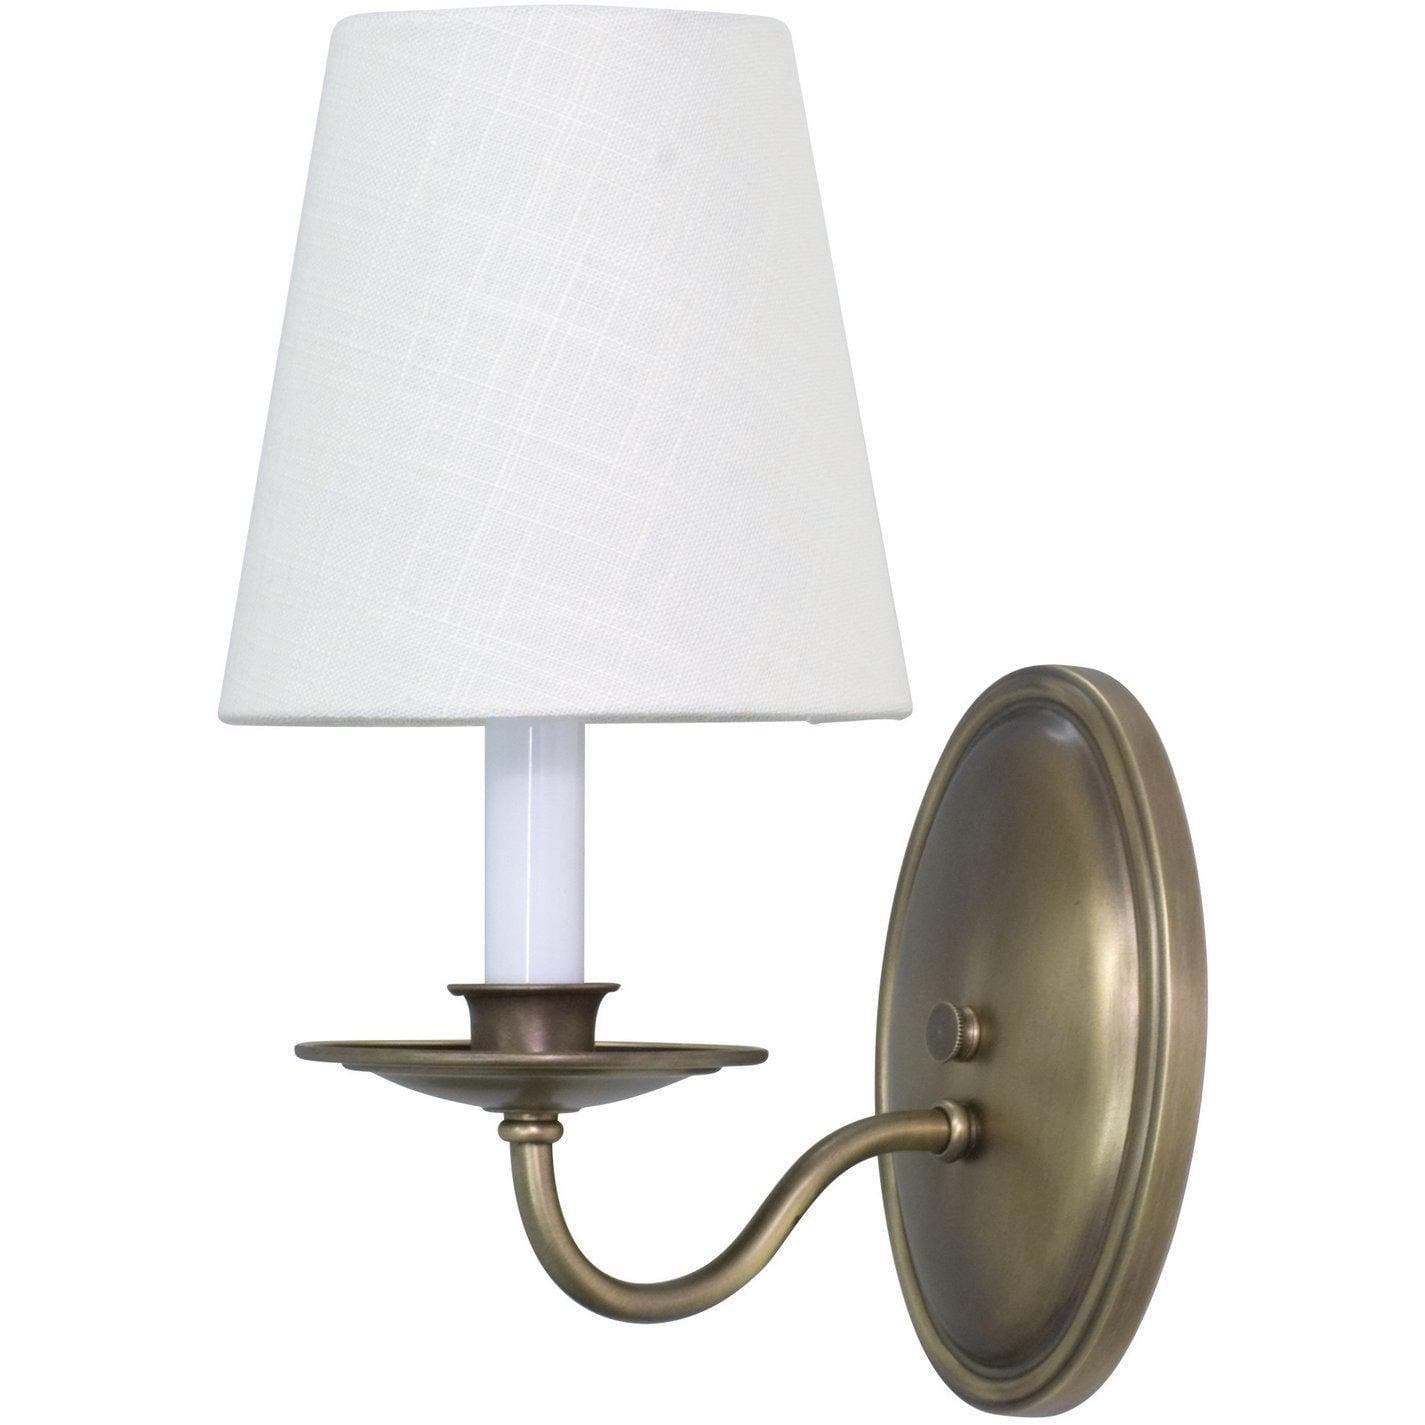 House of Troy - Lake Shore 5-Inch One Light Wall Sconce - LS217-AB | Montreal Lighting & Hardware